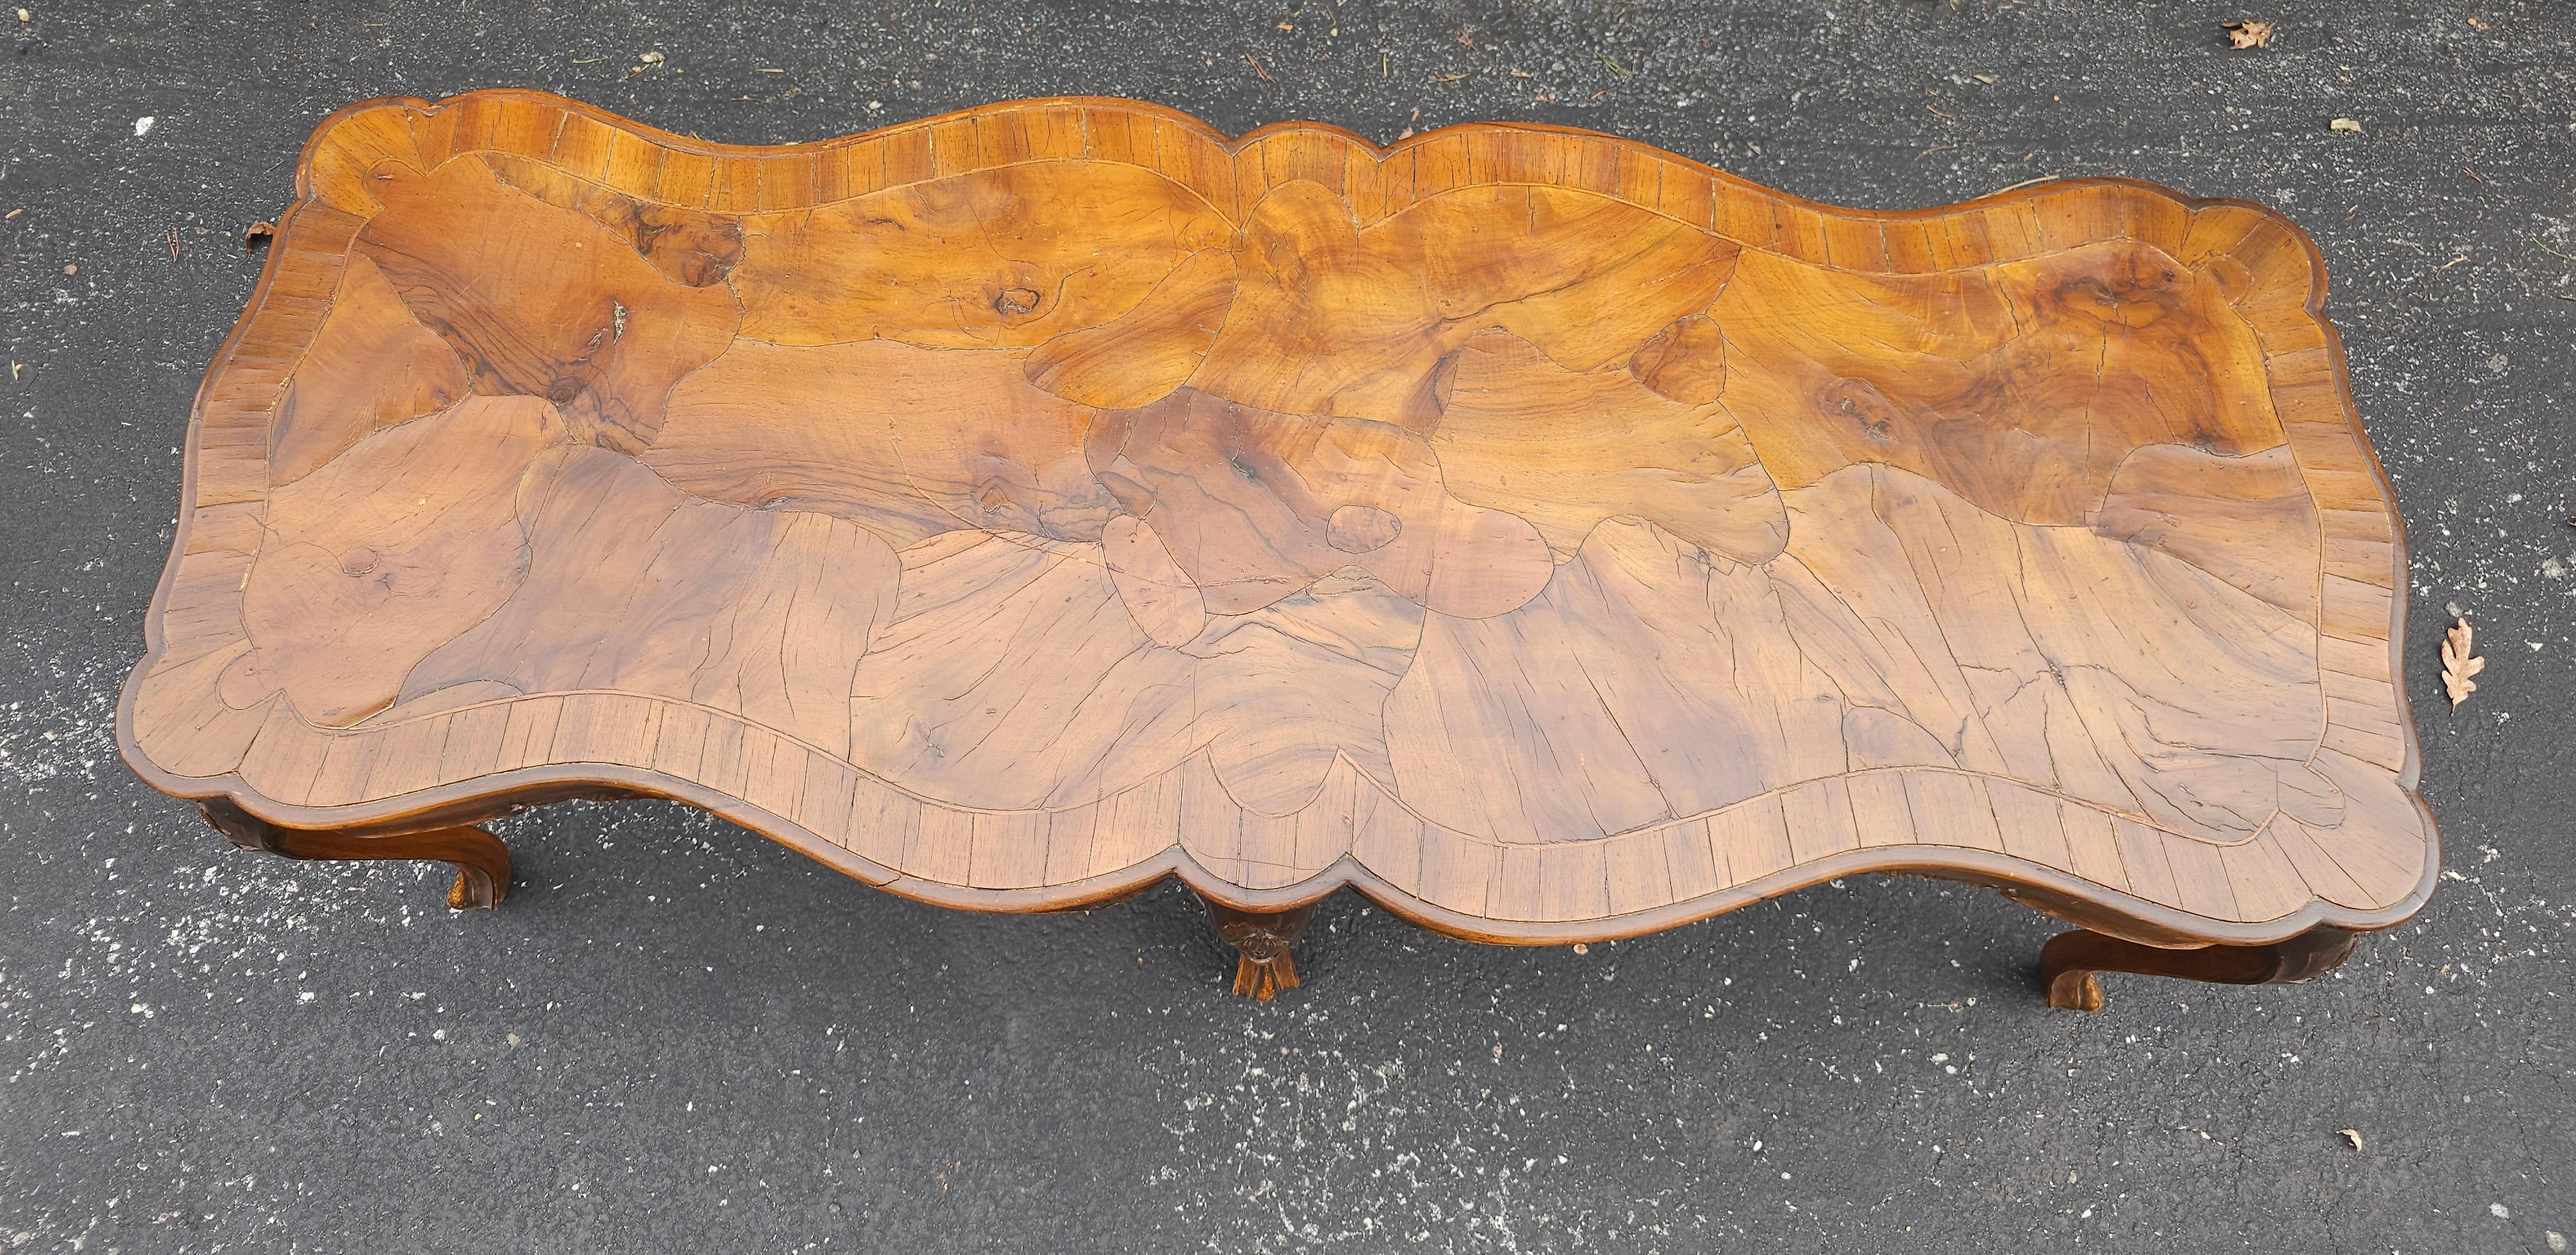 Renaissance Revival Walnut Burl and Fruitwood Cocktail Table For Sale 4